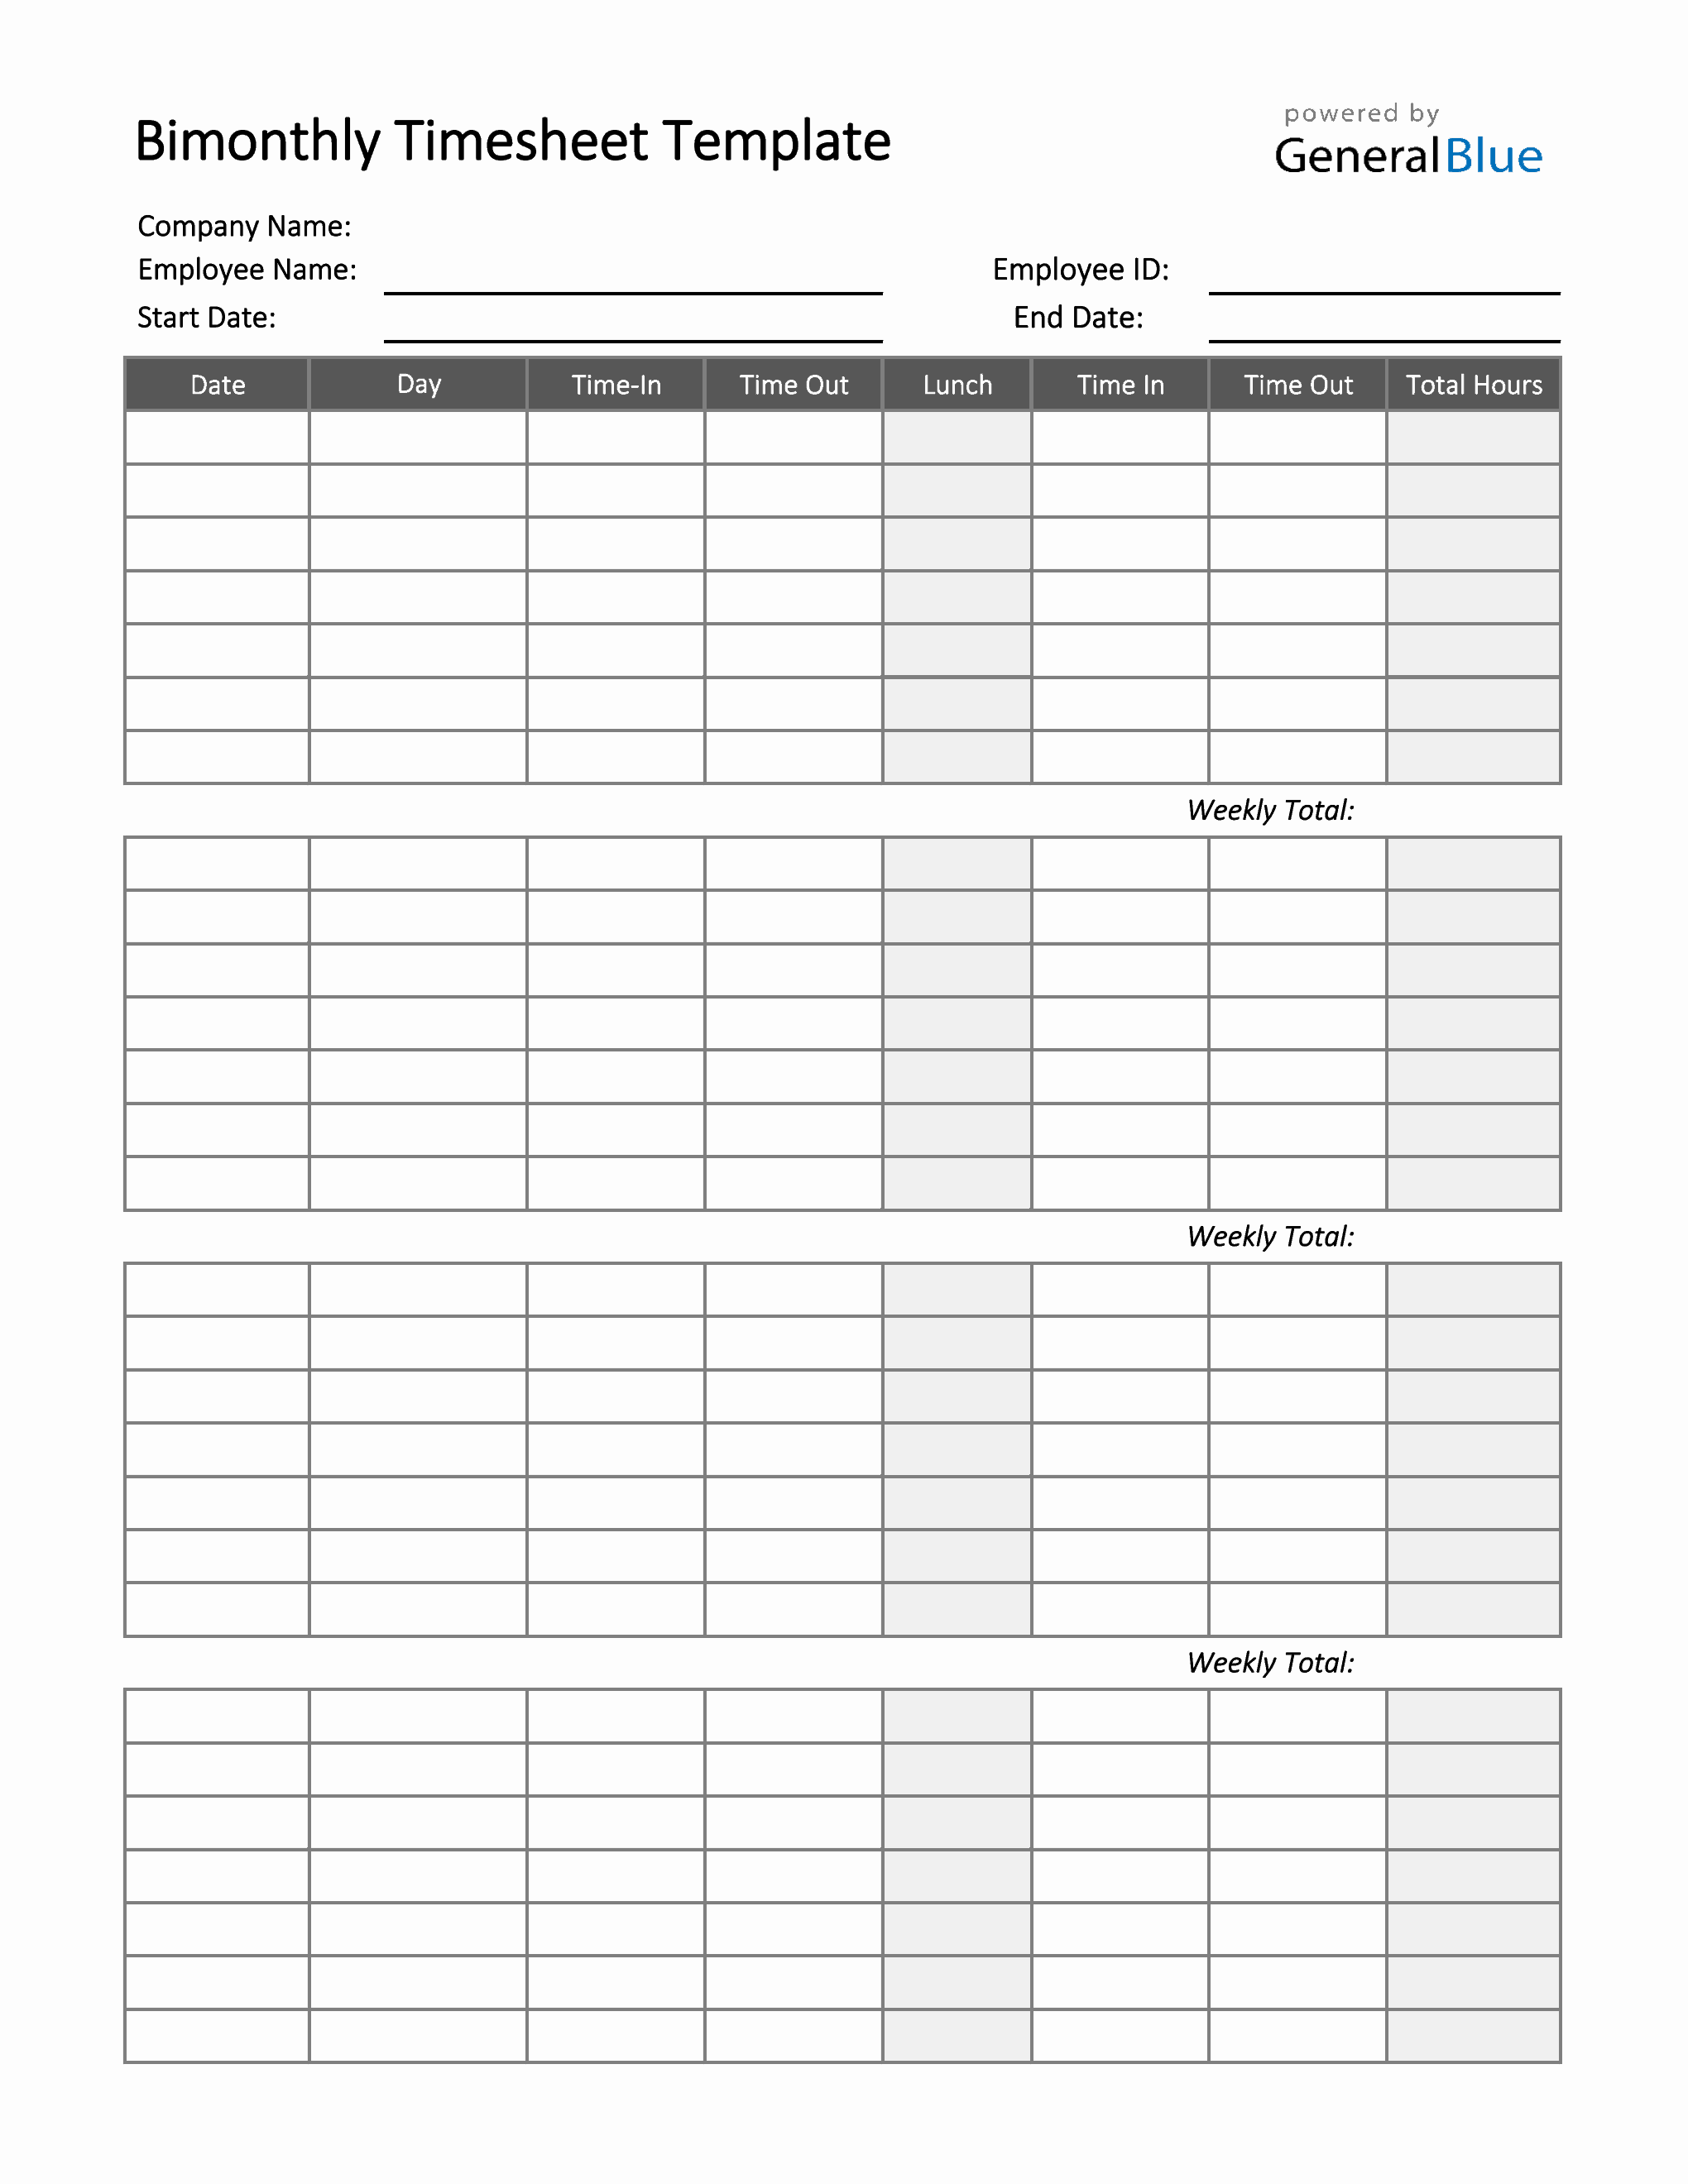 Excel Timesheet Template Bi Weekly Lalapatheater